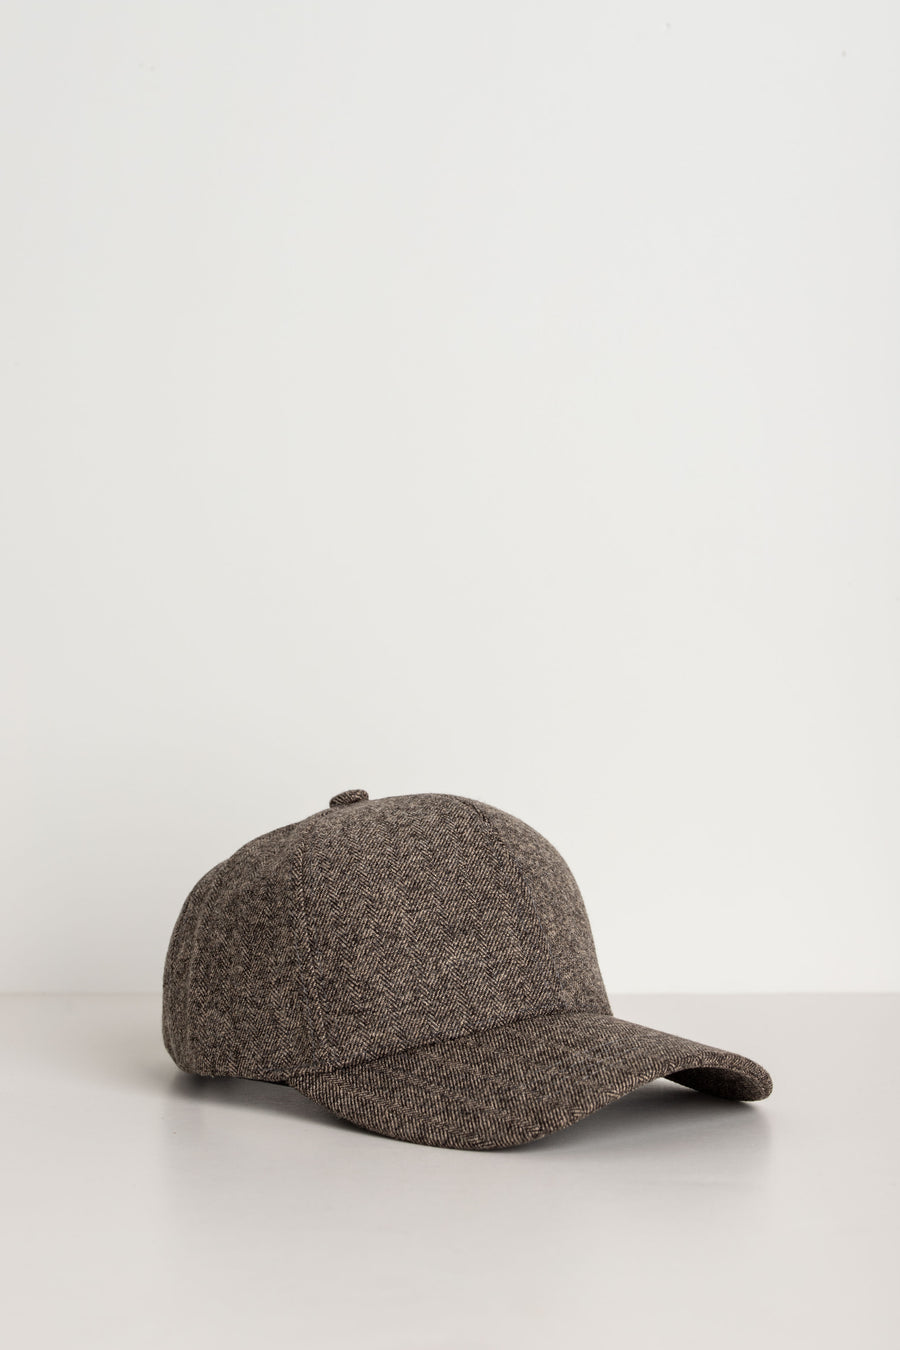 jackieandkate Cap taupe